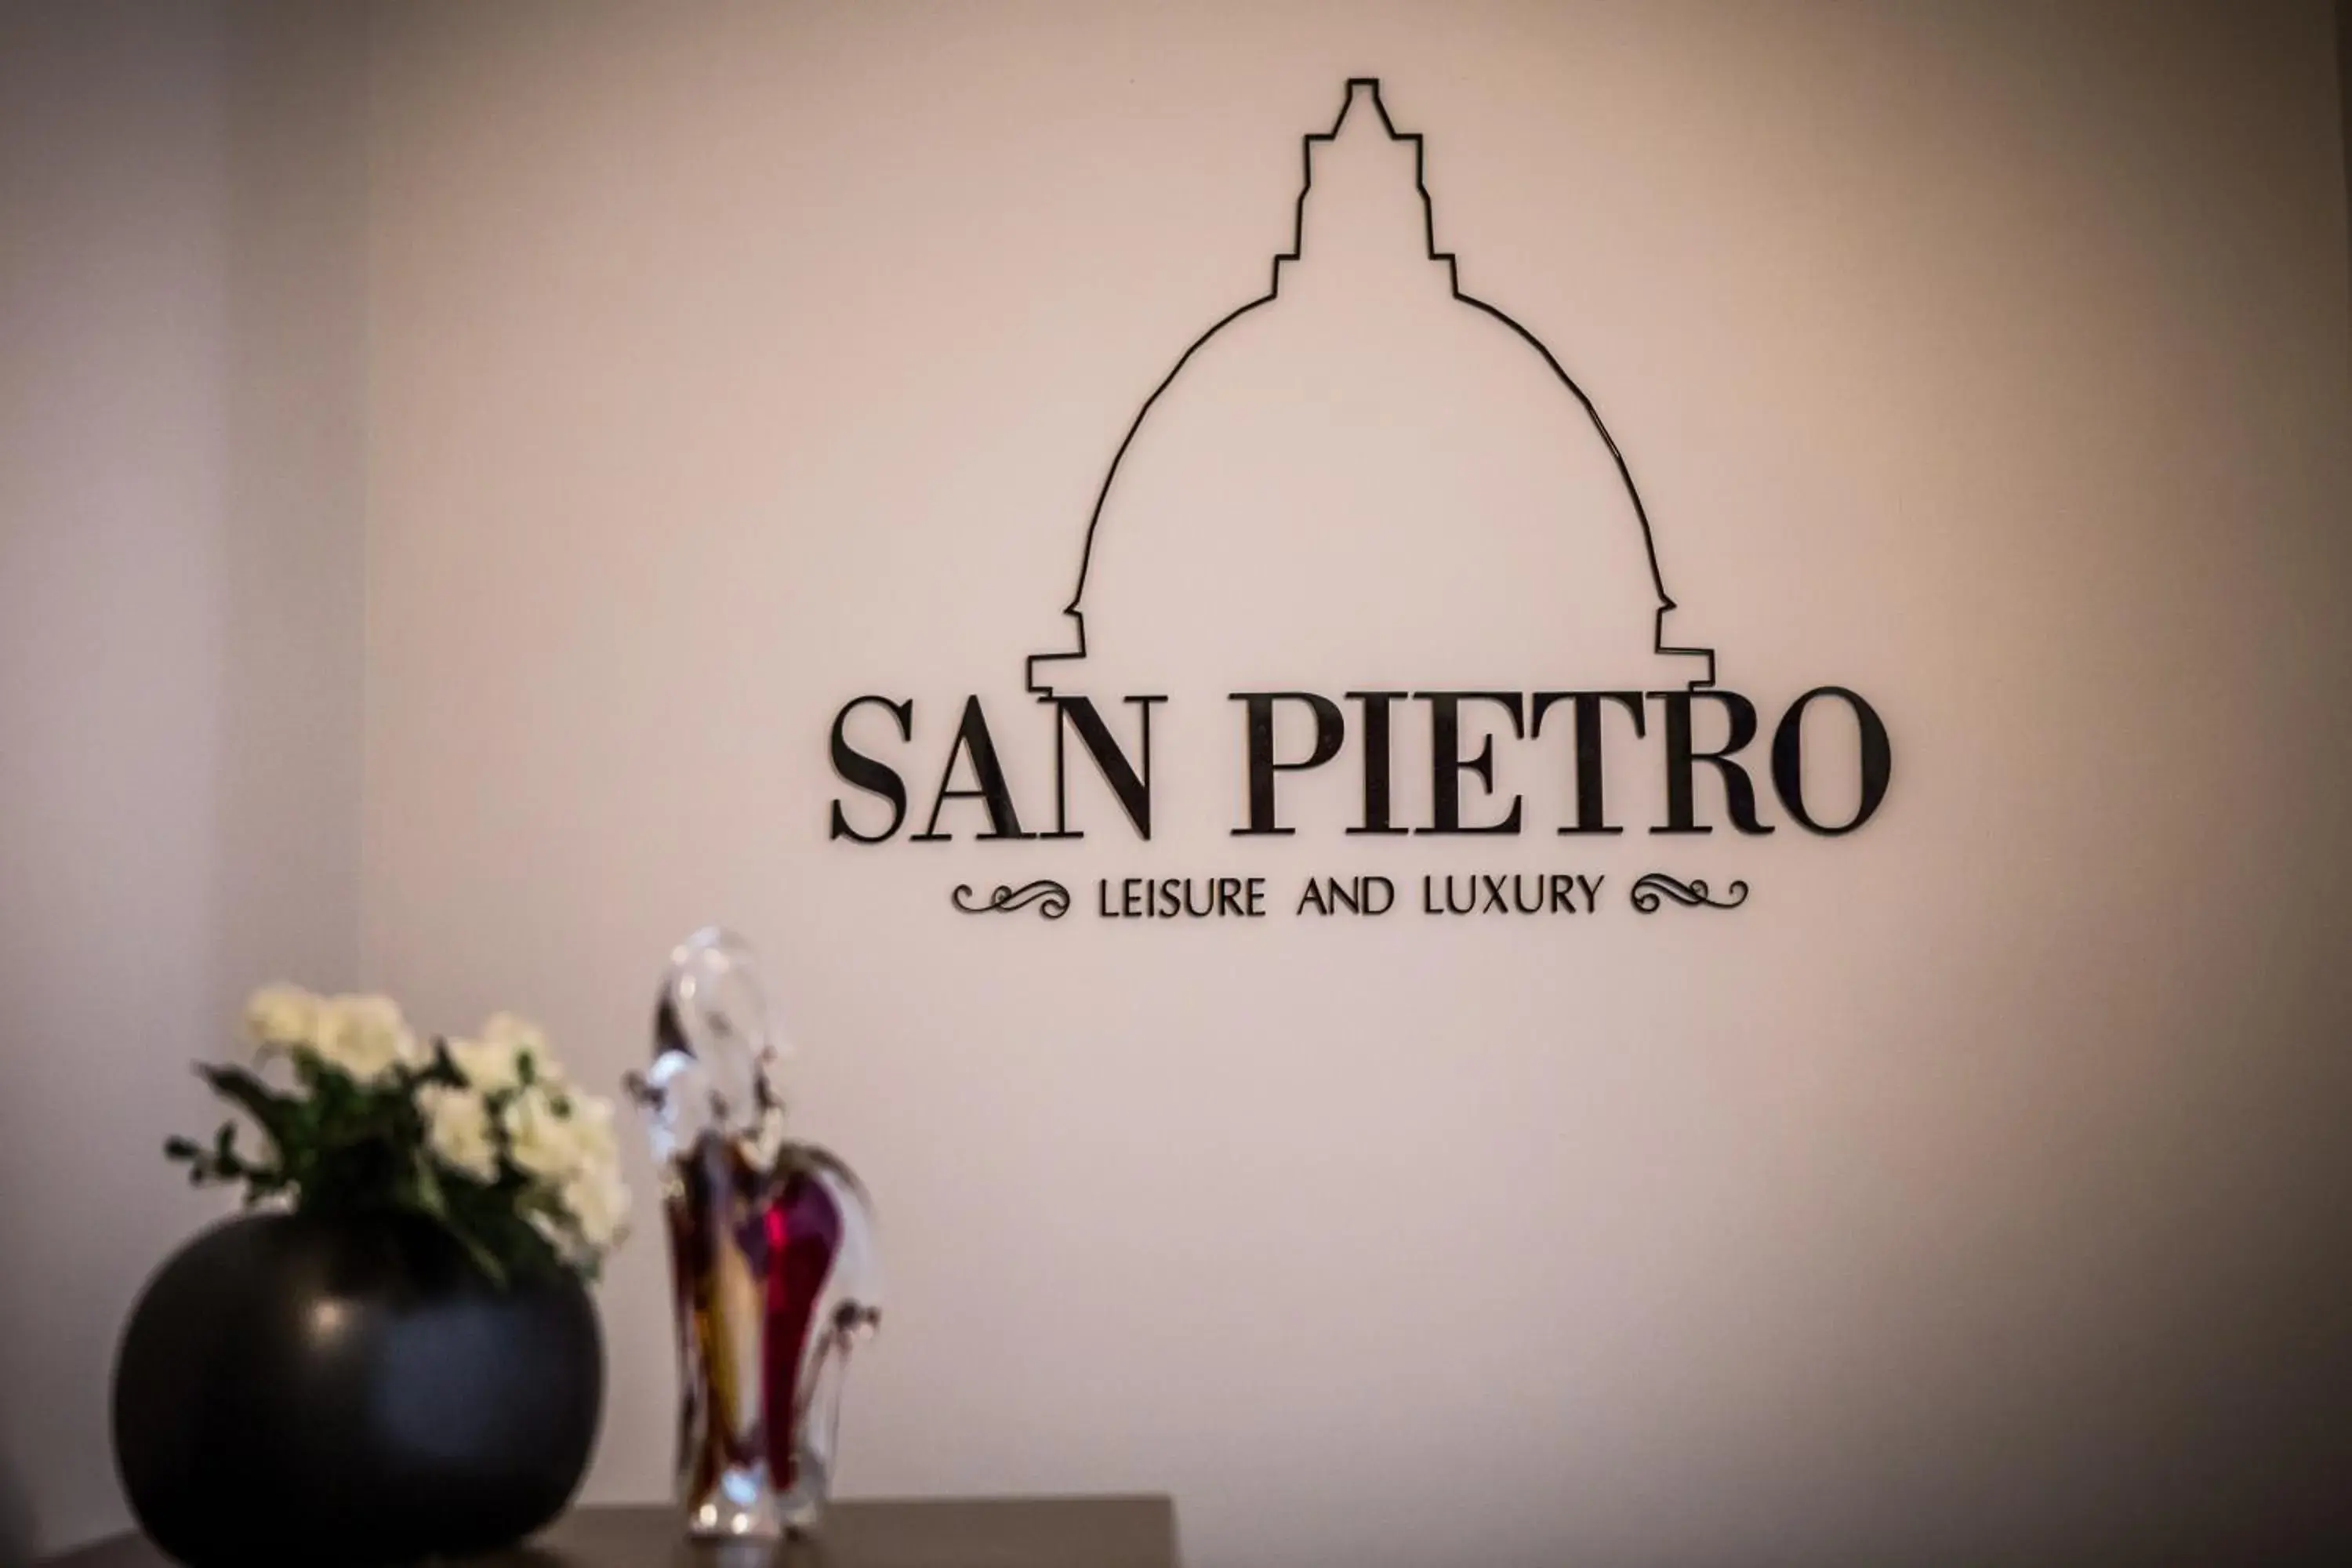 Property logo or sign in San Pietro Leisure and Luxury